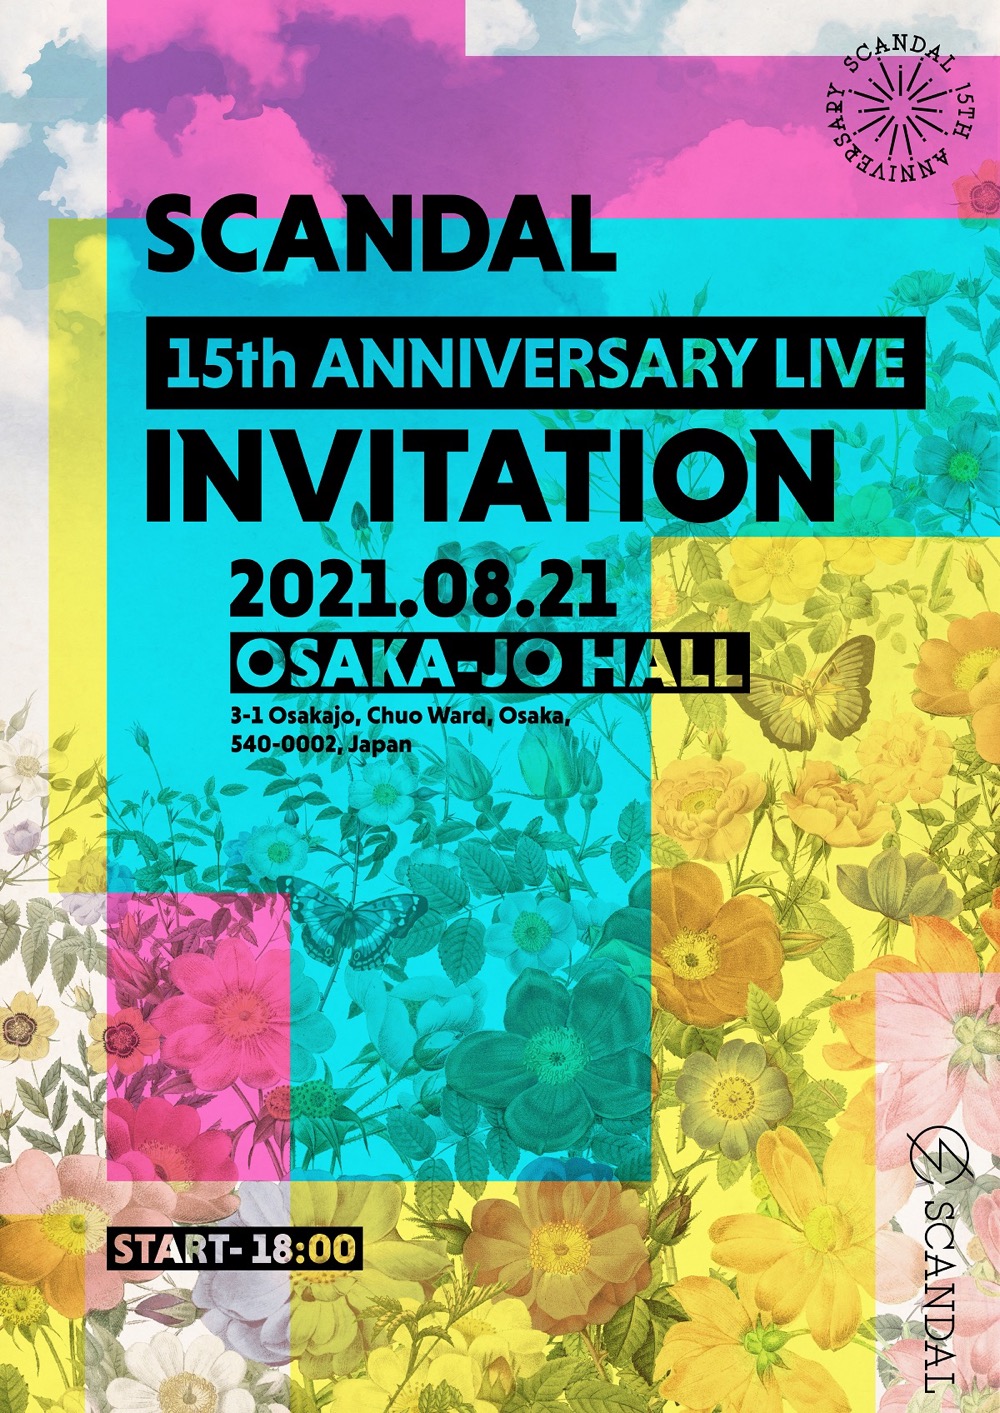 SCANDAL、結成15周年記念日ライブの生配信が決定！ - 画像一覧（1/3）